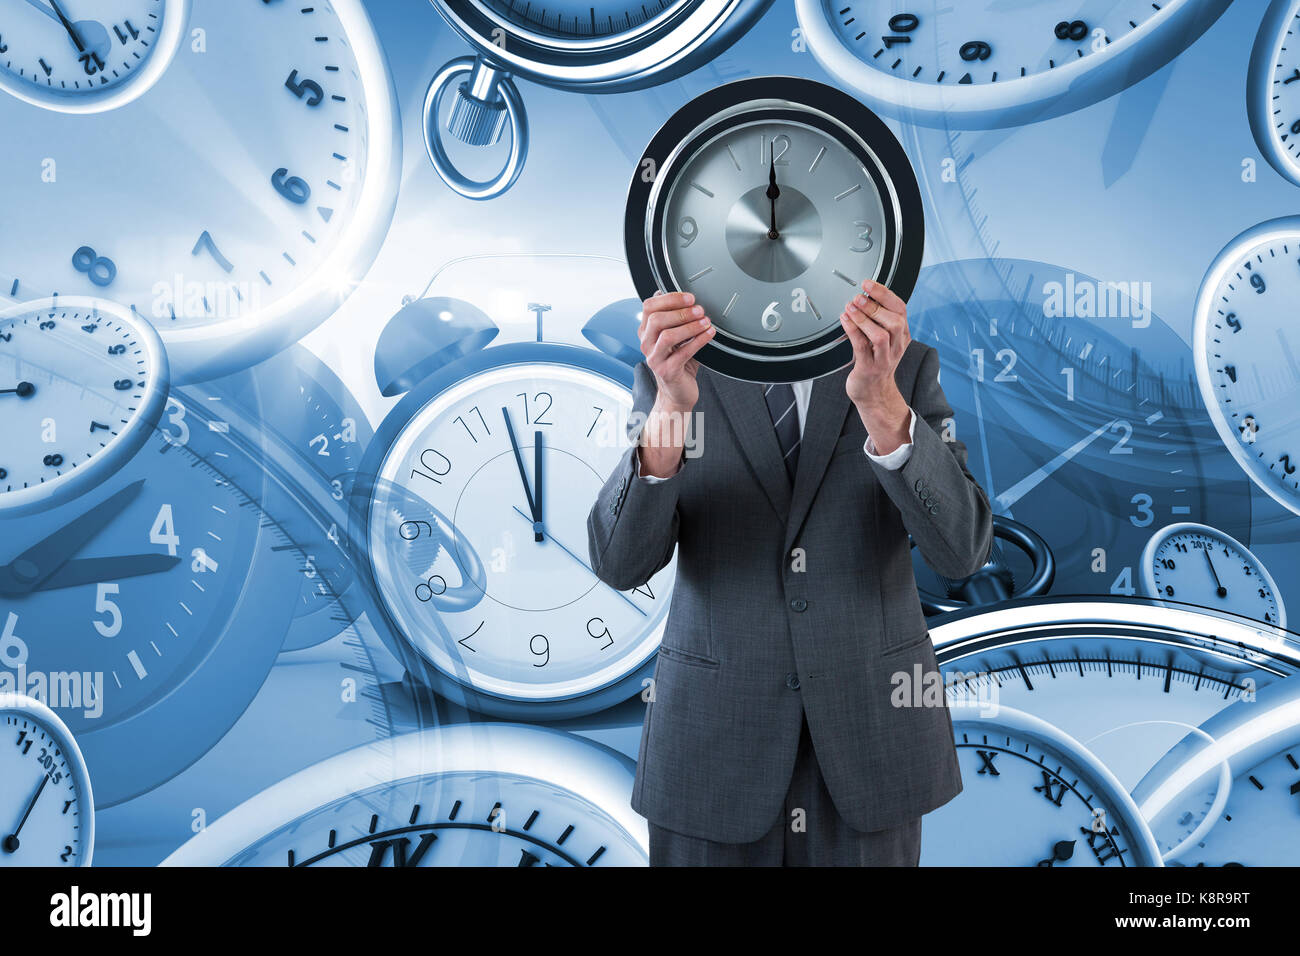 Businessman holding clock in front of his face against digital image of various clocks Stock Photo